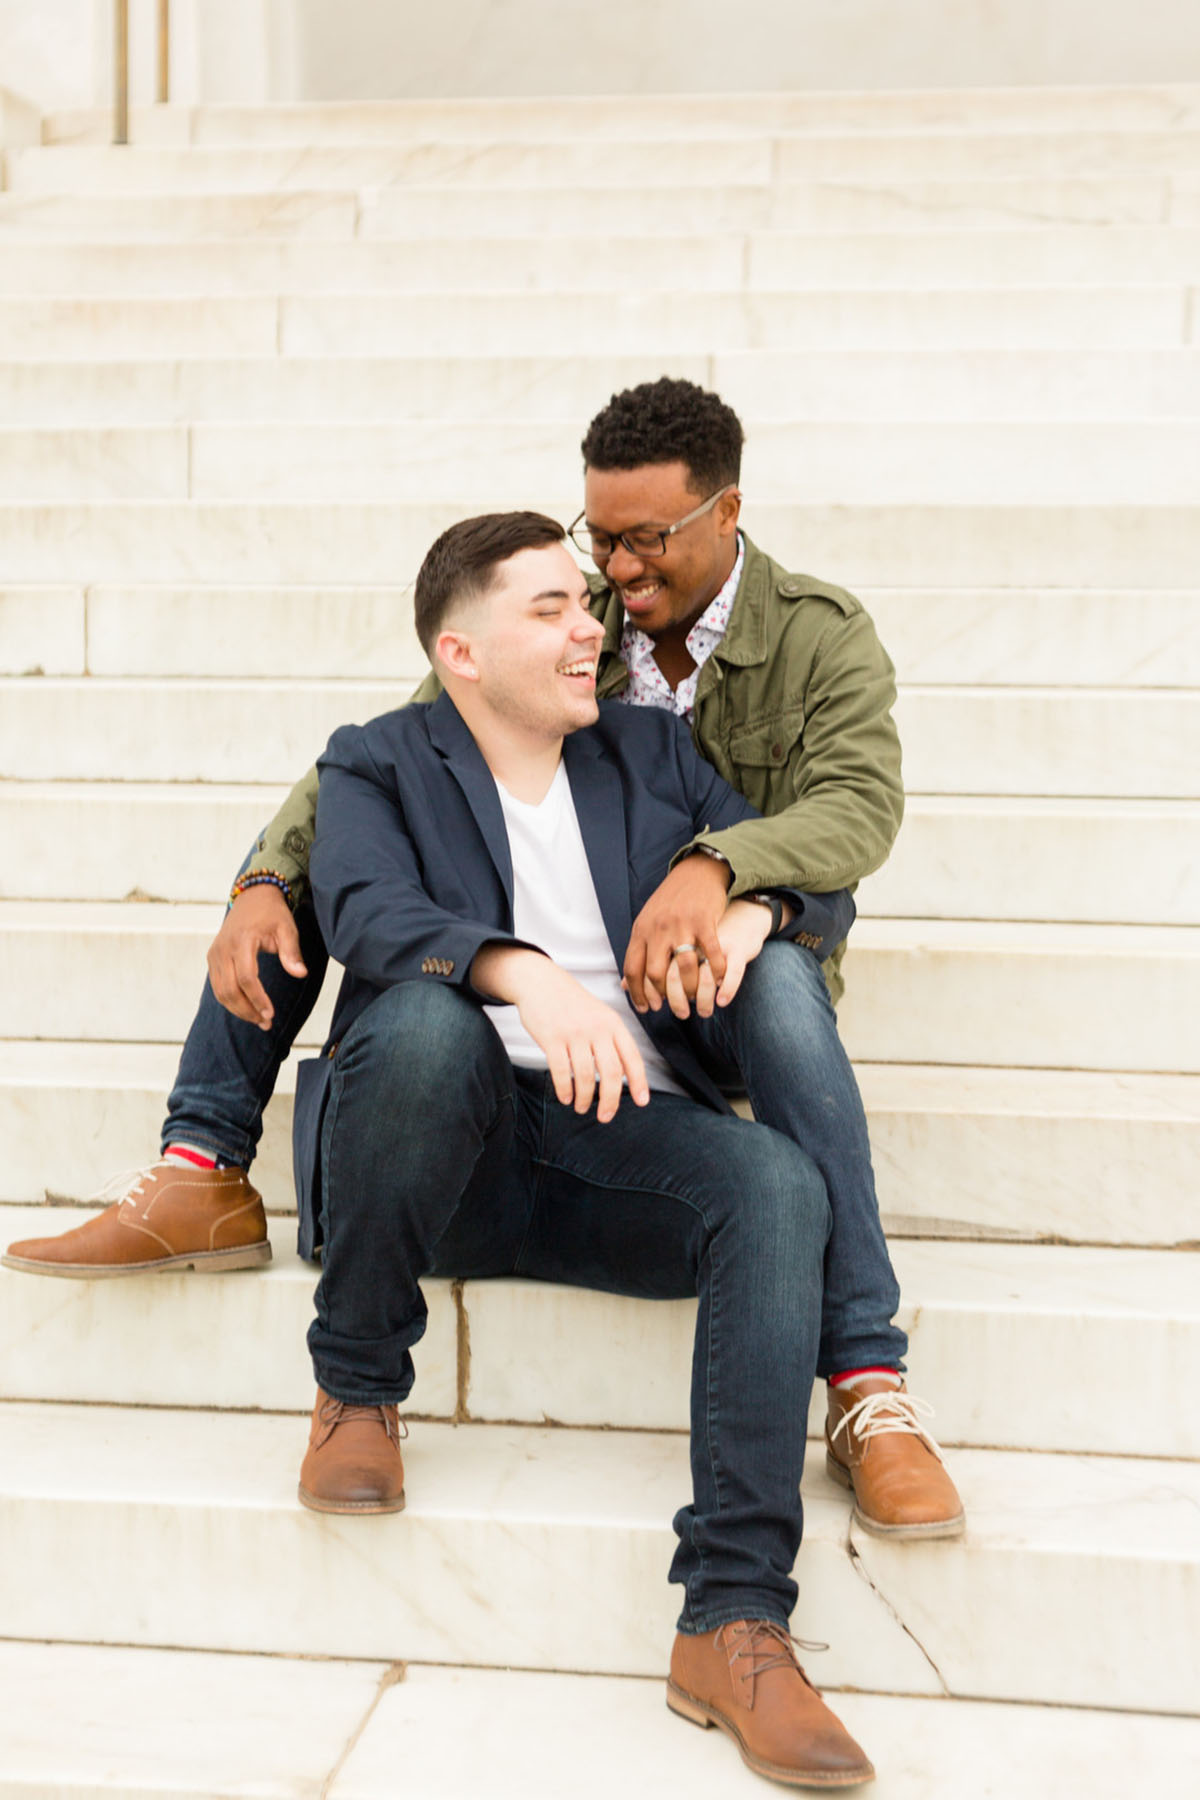 Fall engagement photos around landmarks in Washington, D.C. gay engagement two grooms J Crew Lincoln Memorial Jefferson Memorial National Mall